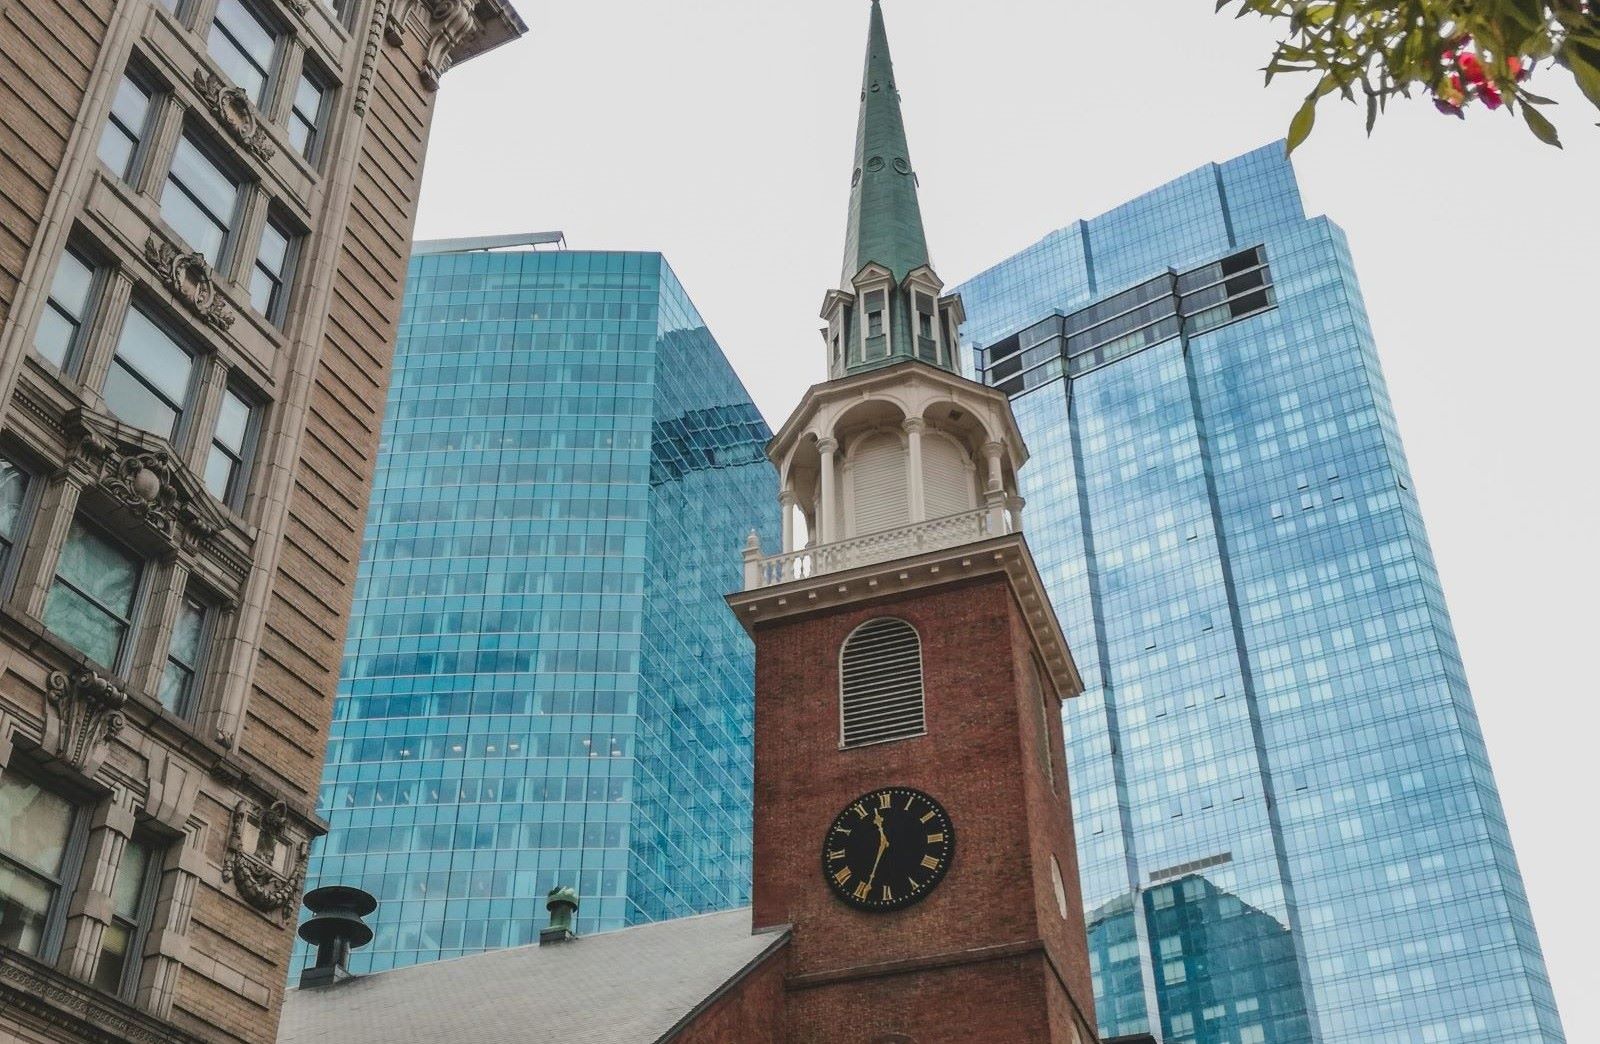 <p class="wp-caption-text">Image Credit: Pexels / Czapp Árpád</p>  <p>Visit the Old South Meeting House, where the Boston Tea Party began. It’s a beautiful building with a rich history of public assembly and free speech.</p>